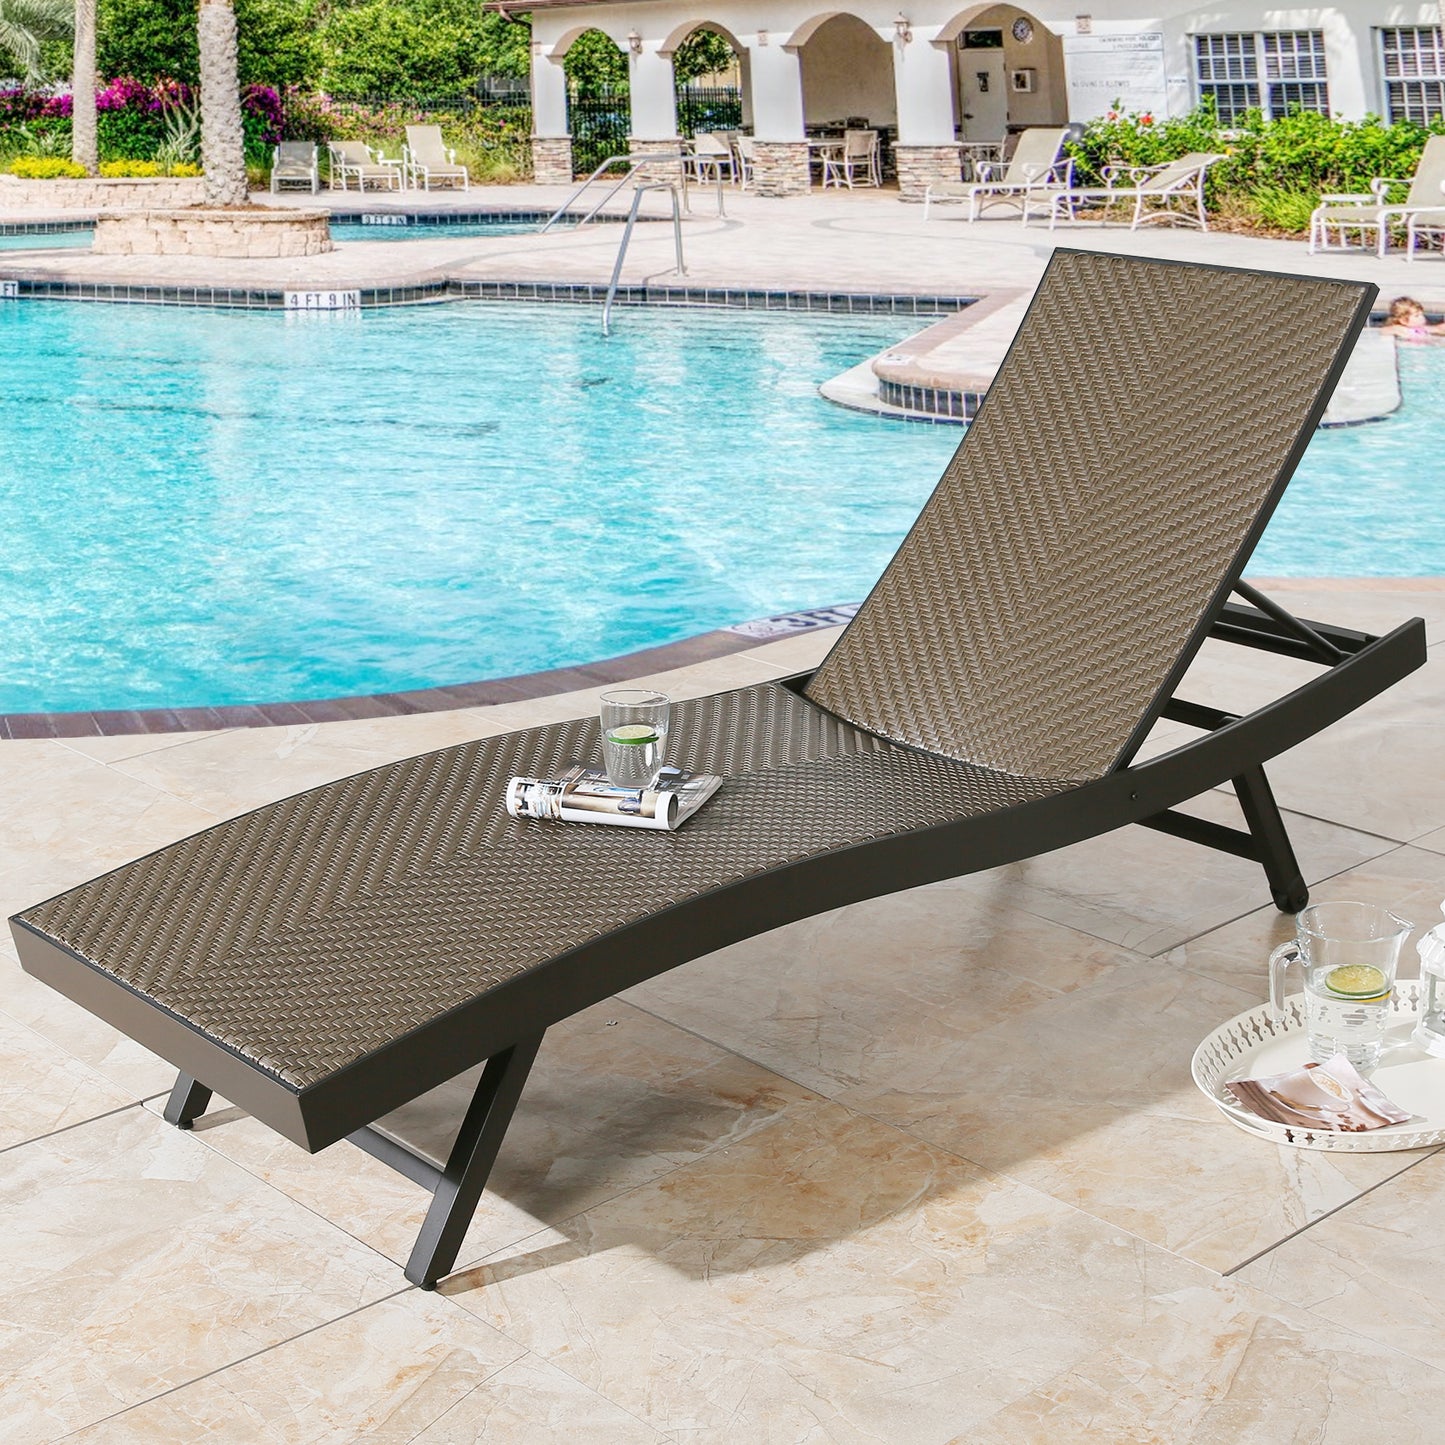 Outdoor Wicker Chaise Lounge Patio Adjustable Reclining Chaise Lounge Chair with Wheels (1 Pack)